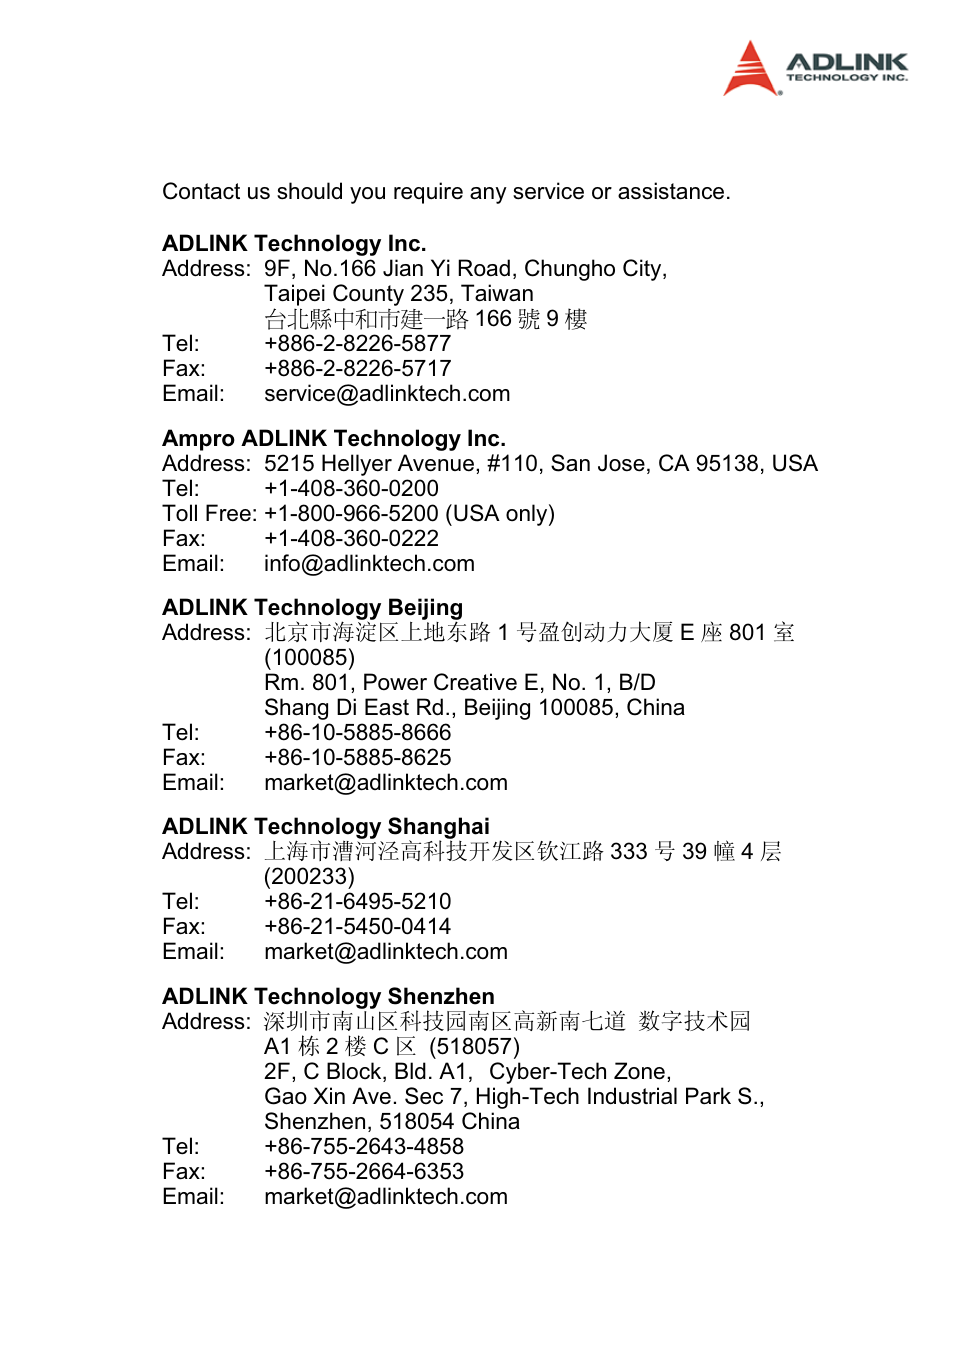 Getting service from adlink | ADLINK USB-3488A User Manual | Page 3 / 40